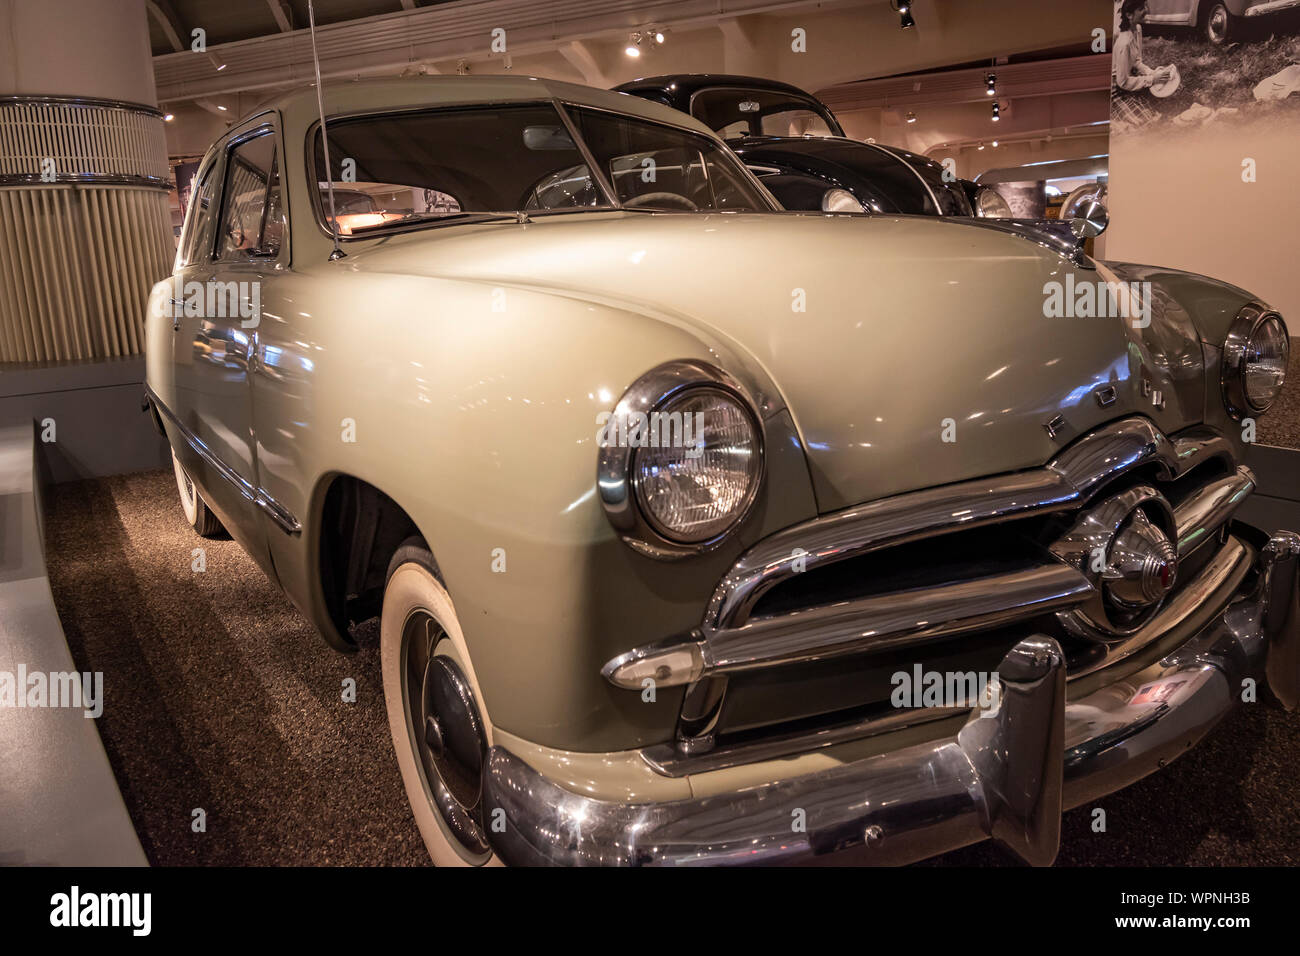 Dearborn, Mi, Usa - March 2019: The 1949 Ford Sedan presented in the Henry Ford Museum of American Innovation. Stock Photo